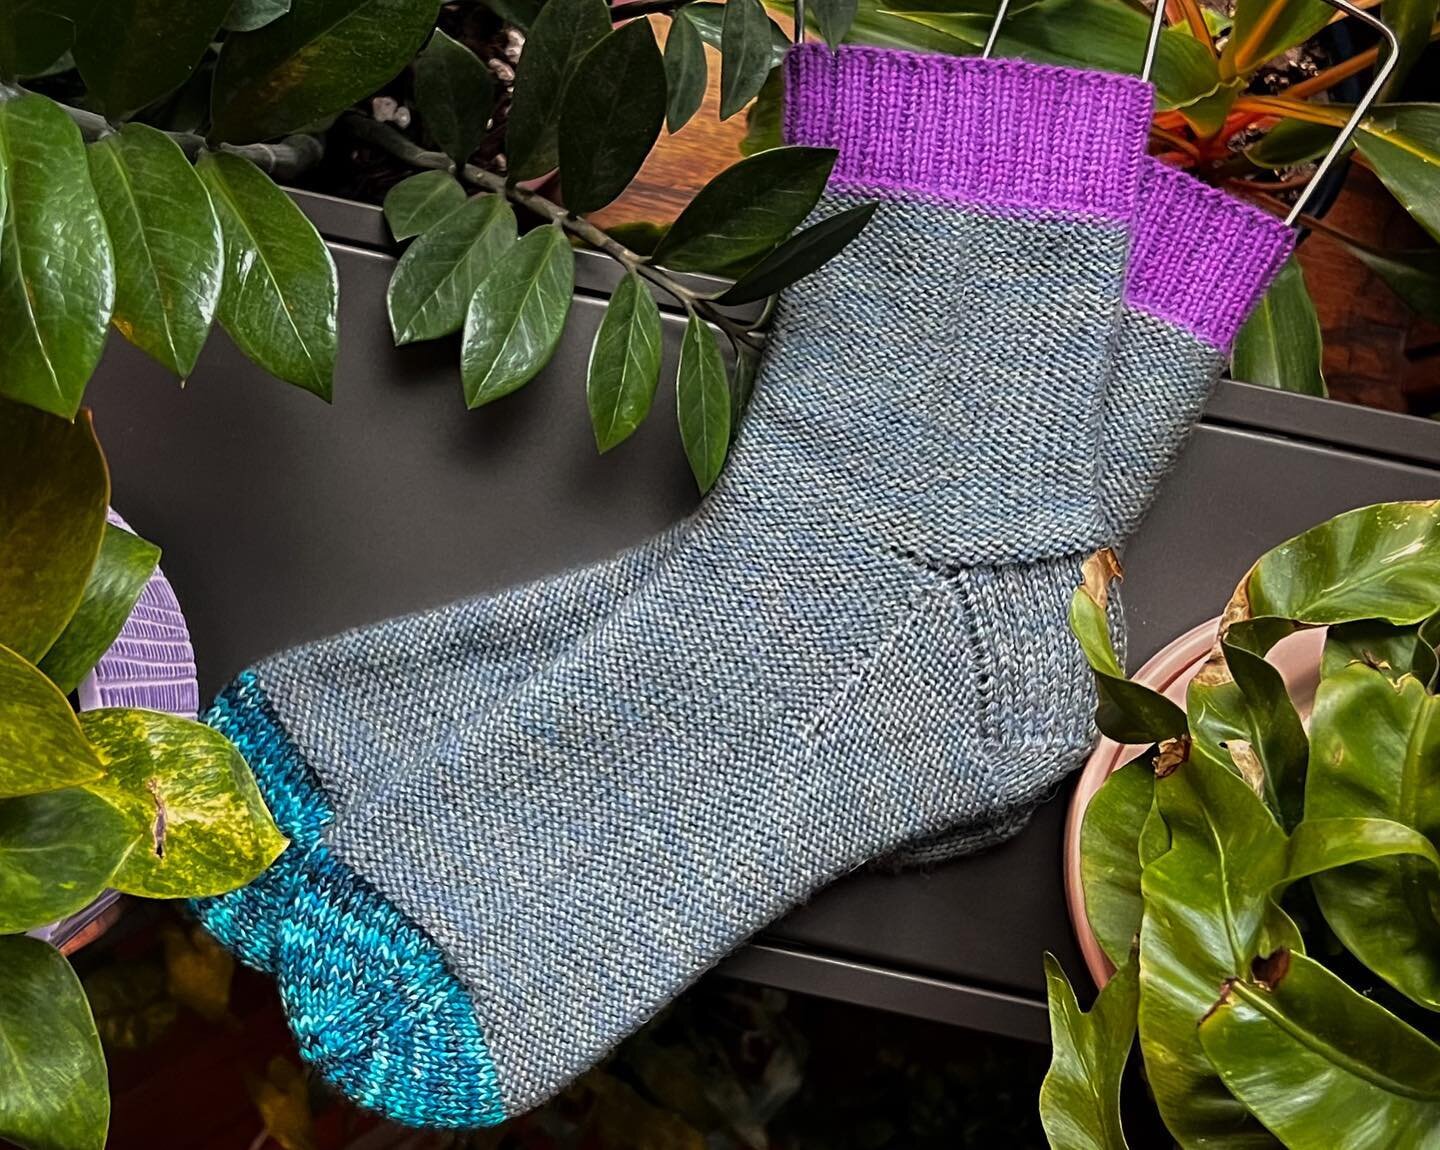 I finished these socks a couple weeks ago after starting them in Denver where I was having a mini-reunion with some of my closest friends. They&rsquo;ll always remind me of the fun memories we made! This is one of my favorite things about knitting&he